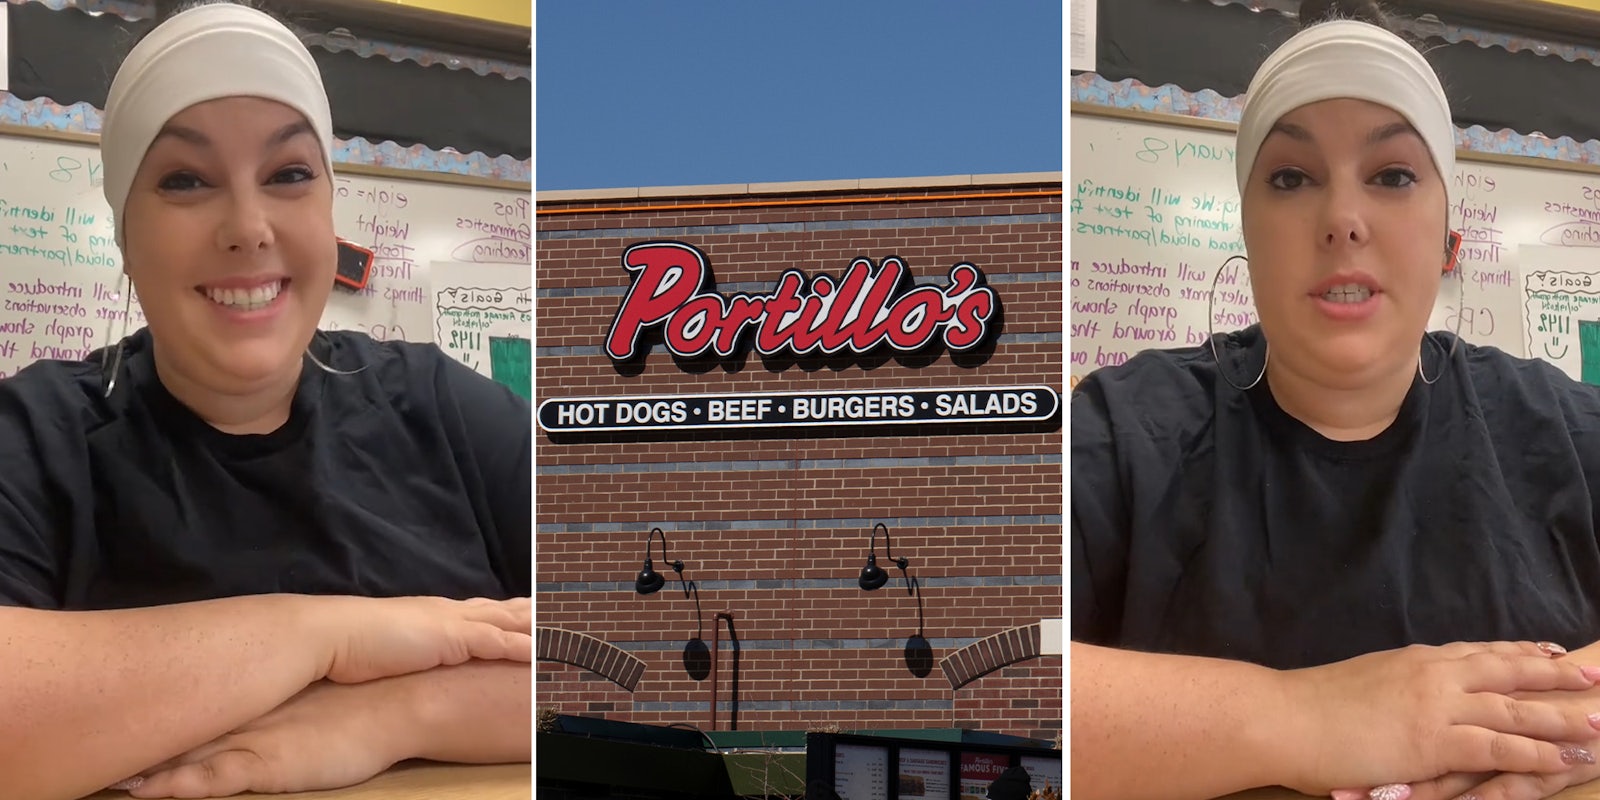 Customer says she placed $550 catering order that arrived late, cold. She’s shocked by Portillo’s response